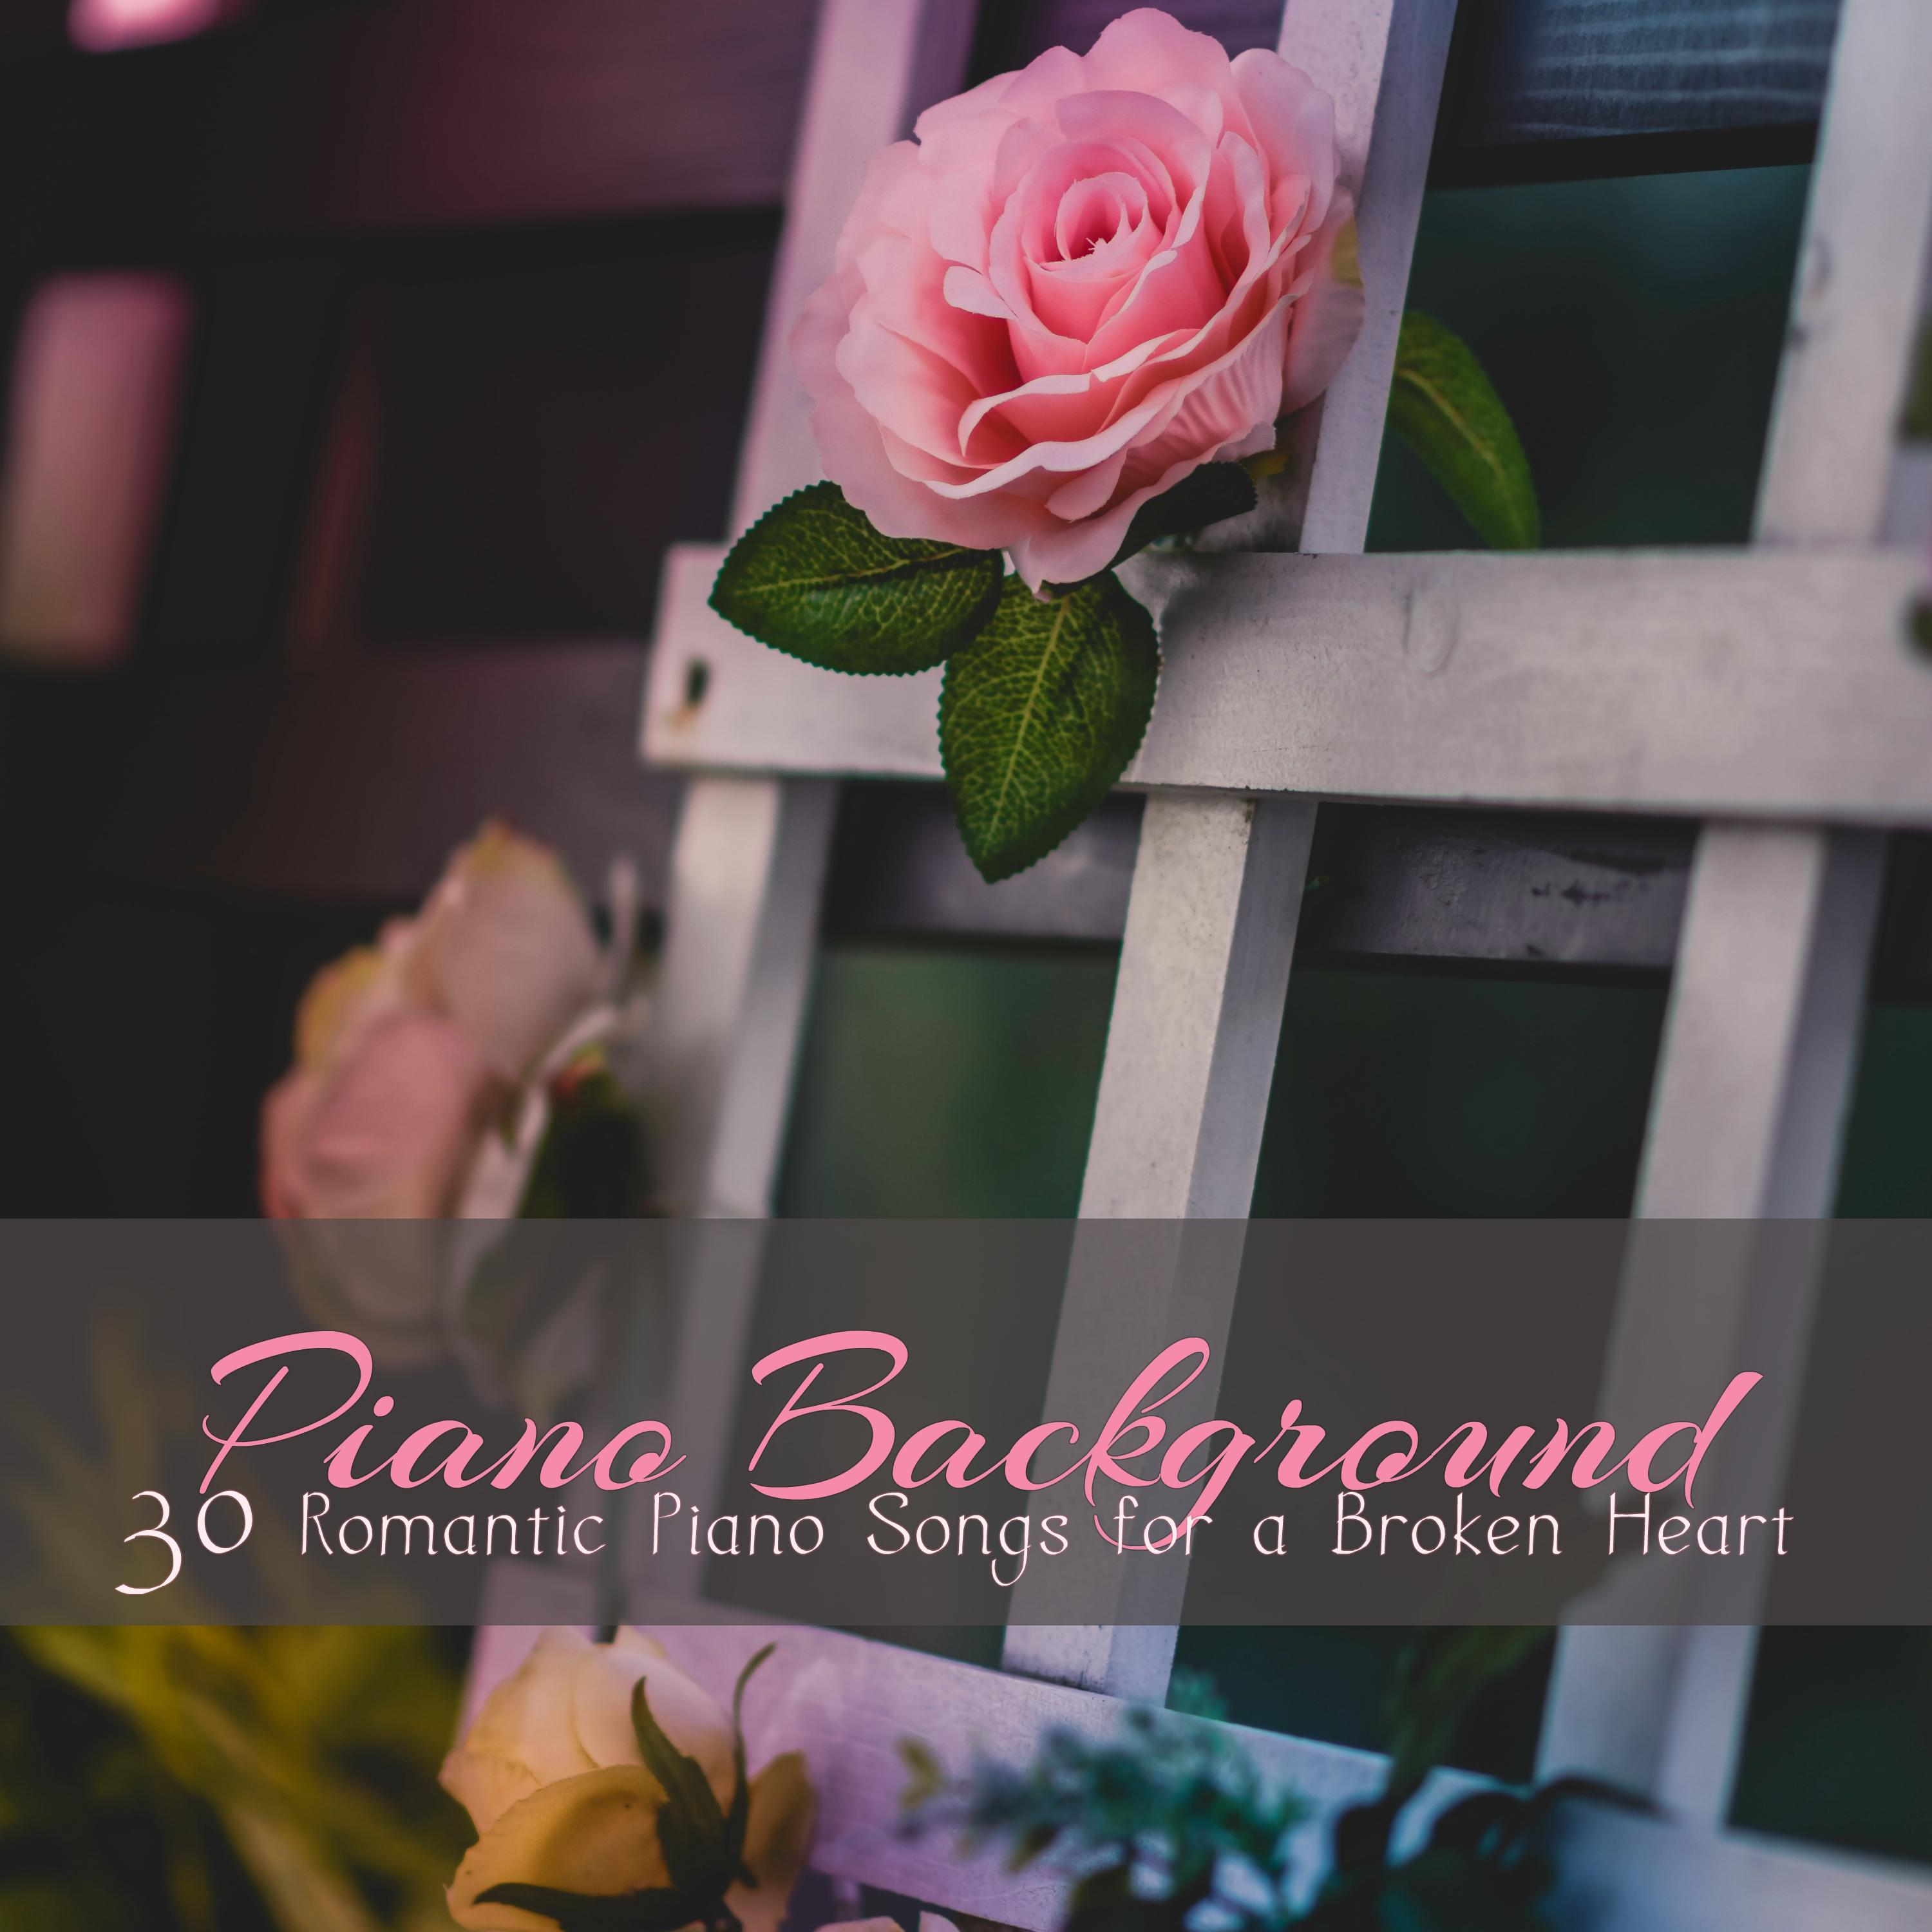 Piano Background  30 Romantic Piano Songs for a Broken Heart